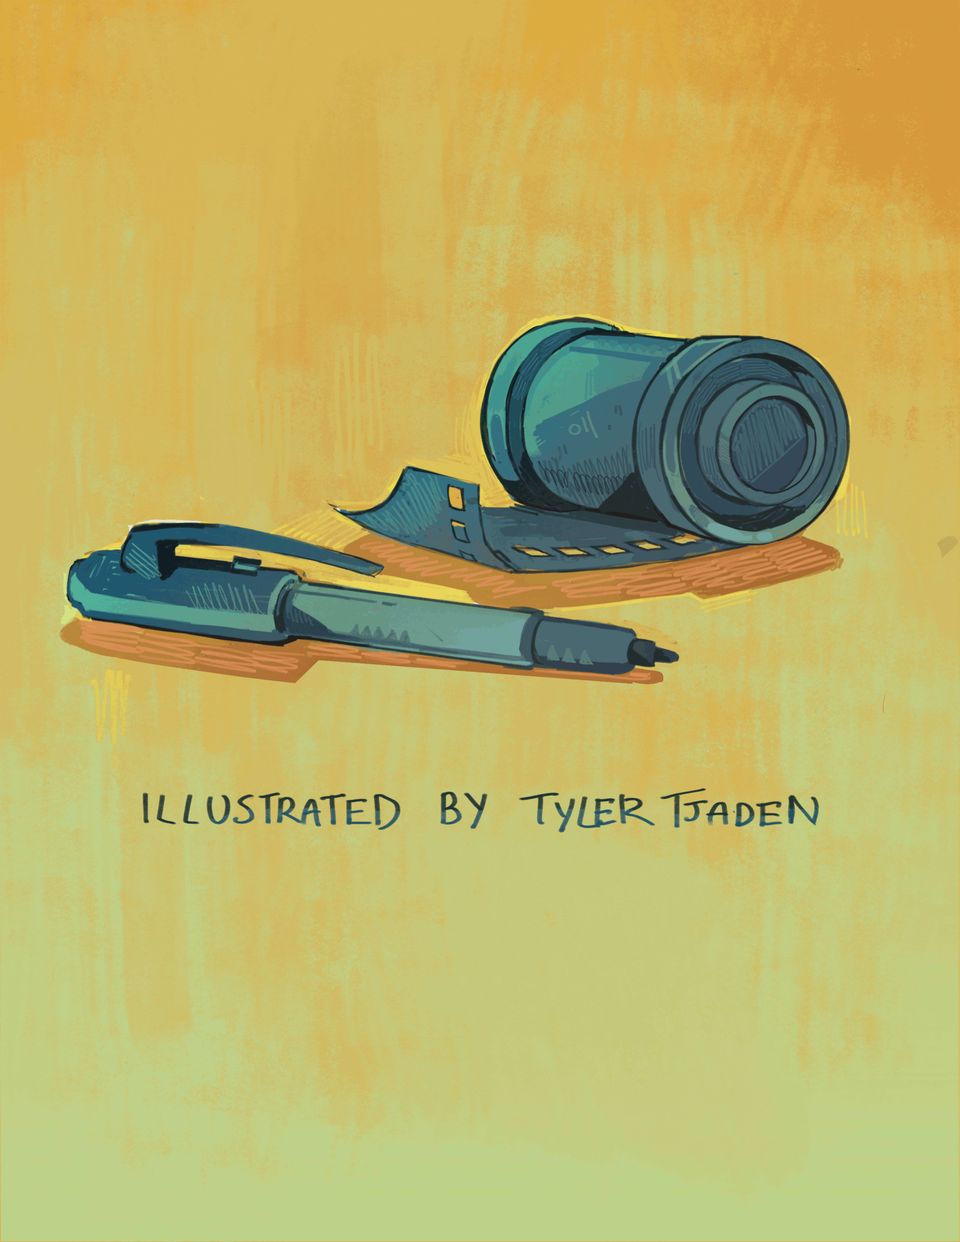 A roll of film and pen sit against a yellow background. Text reads: "Illustrated by Tyler Tjaden."